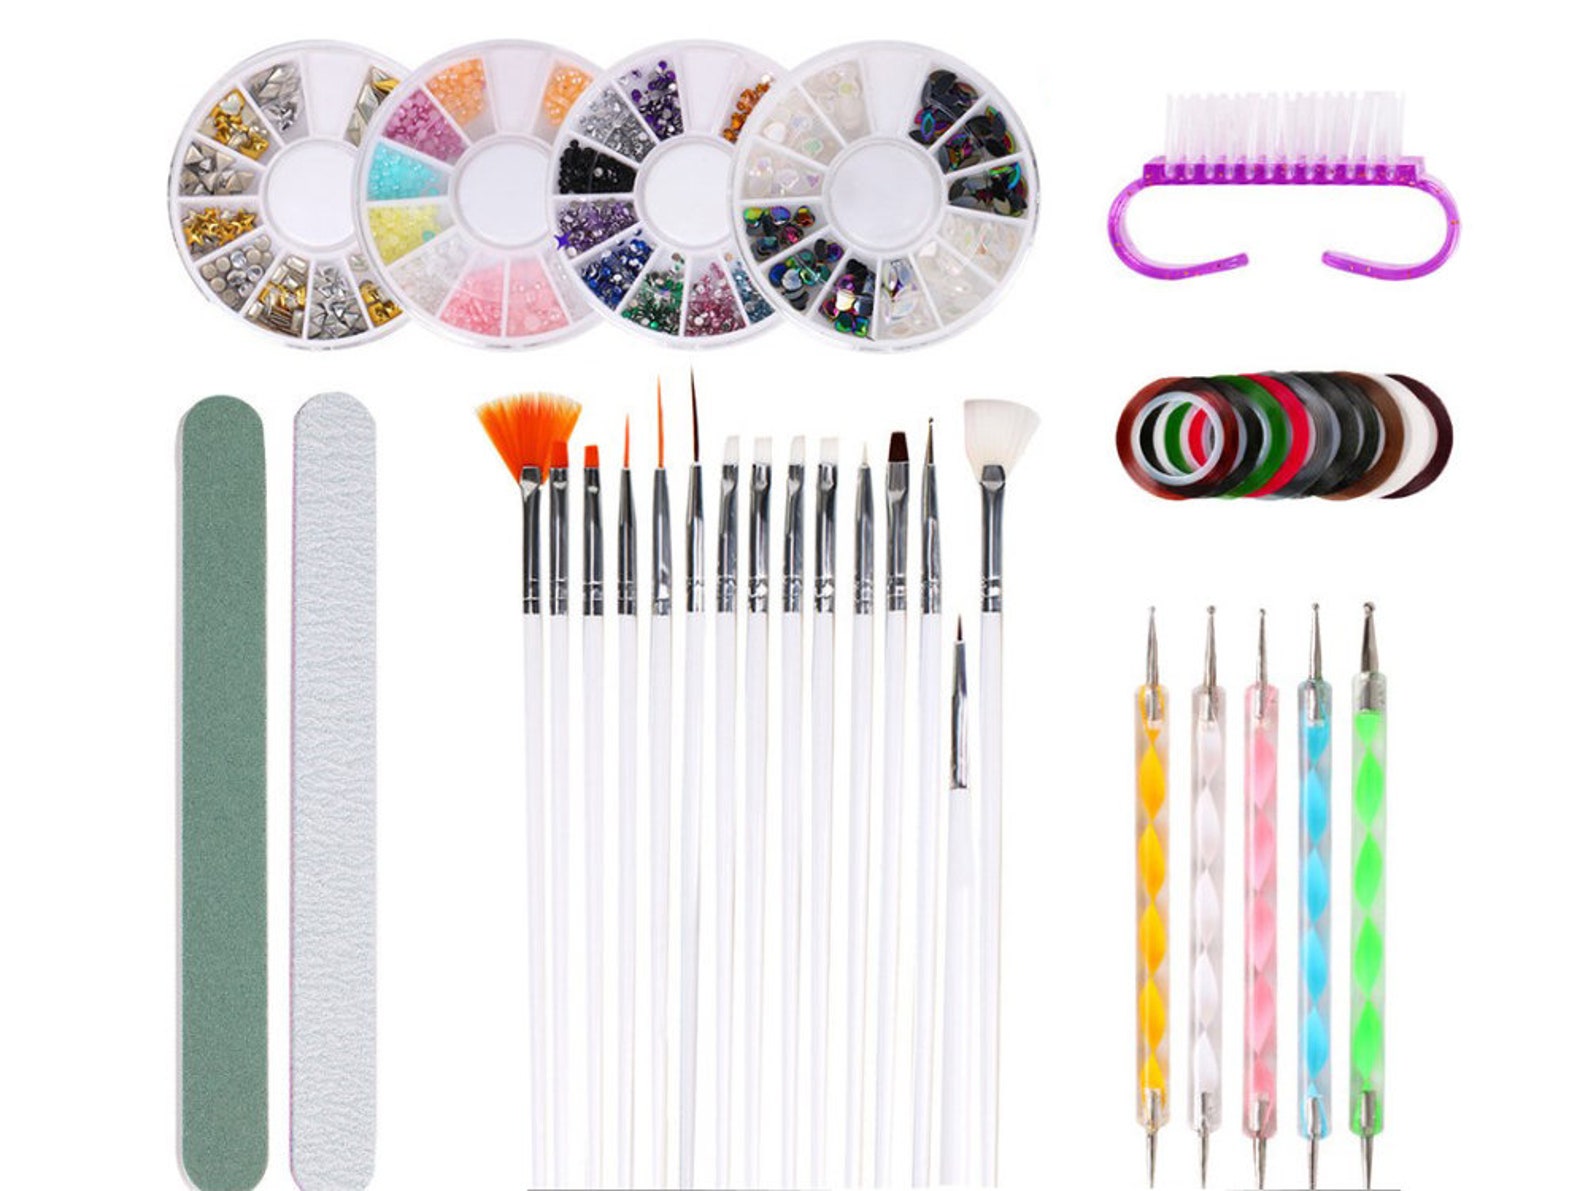 1. Nail Art Tool Set Philippines - wide 2